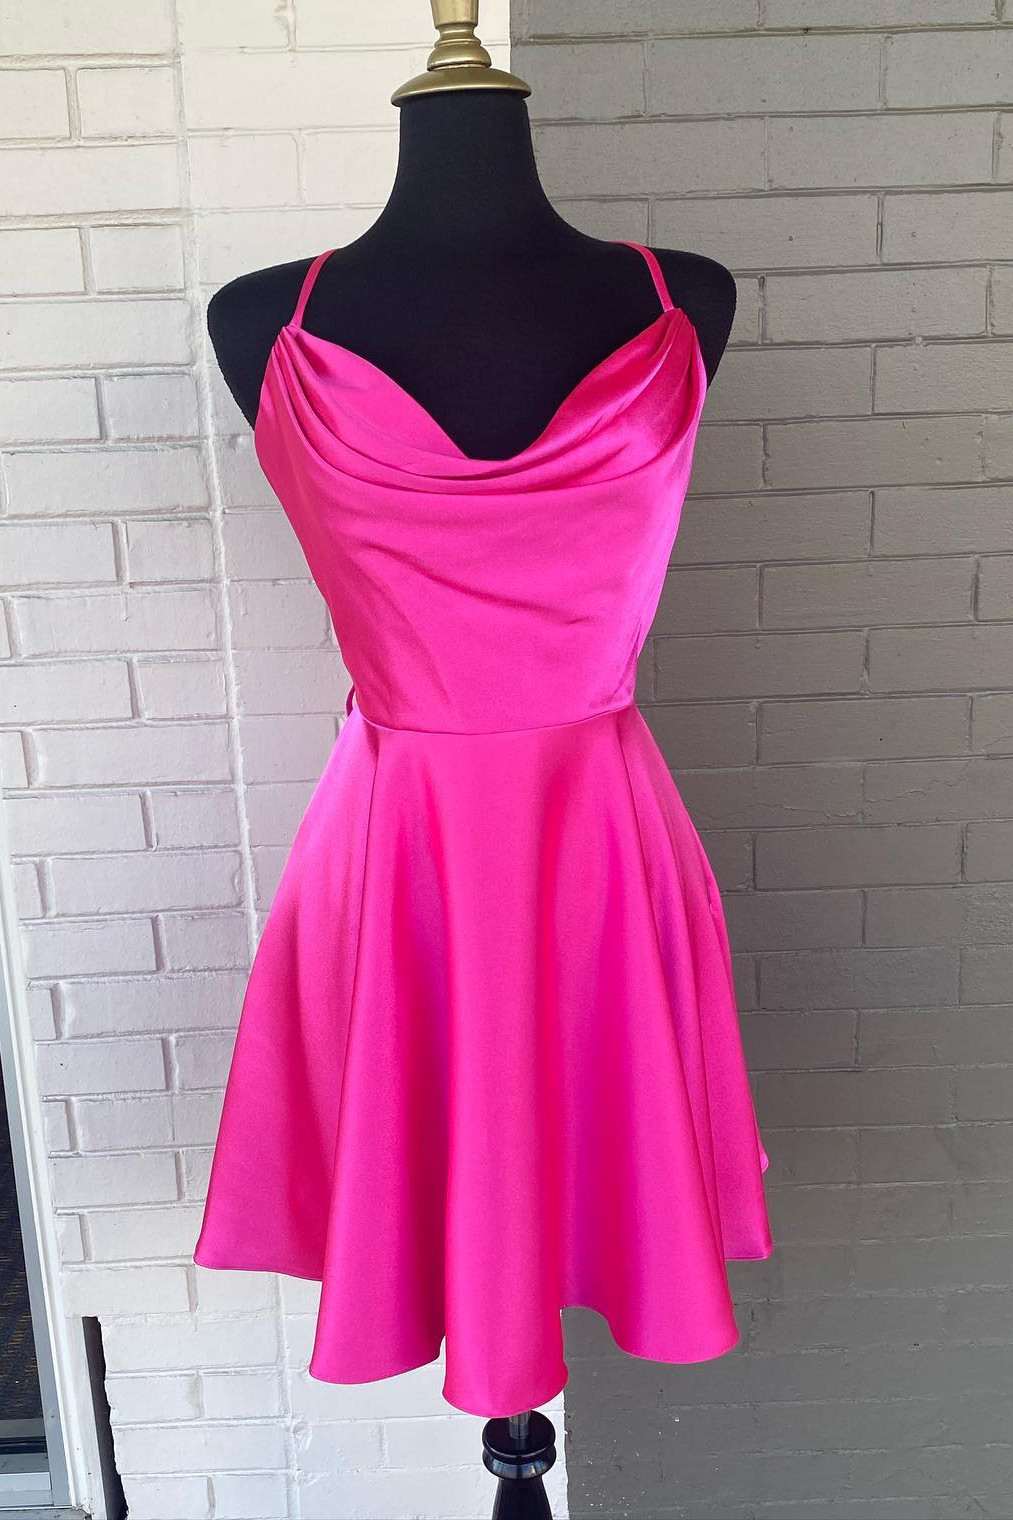 Neon Pink Lace-Up A-Line Satin Homecoming Dress Outfits For Girls,Night Dress Outfits For Women Party Short